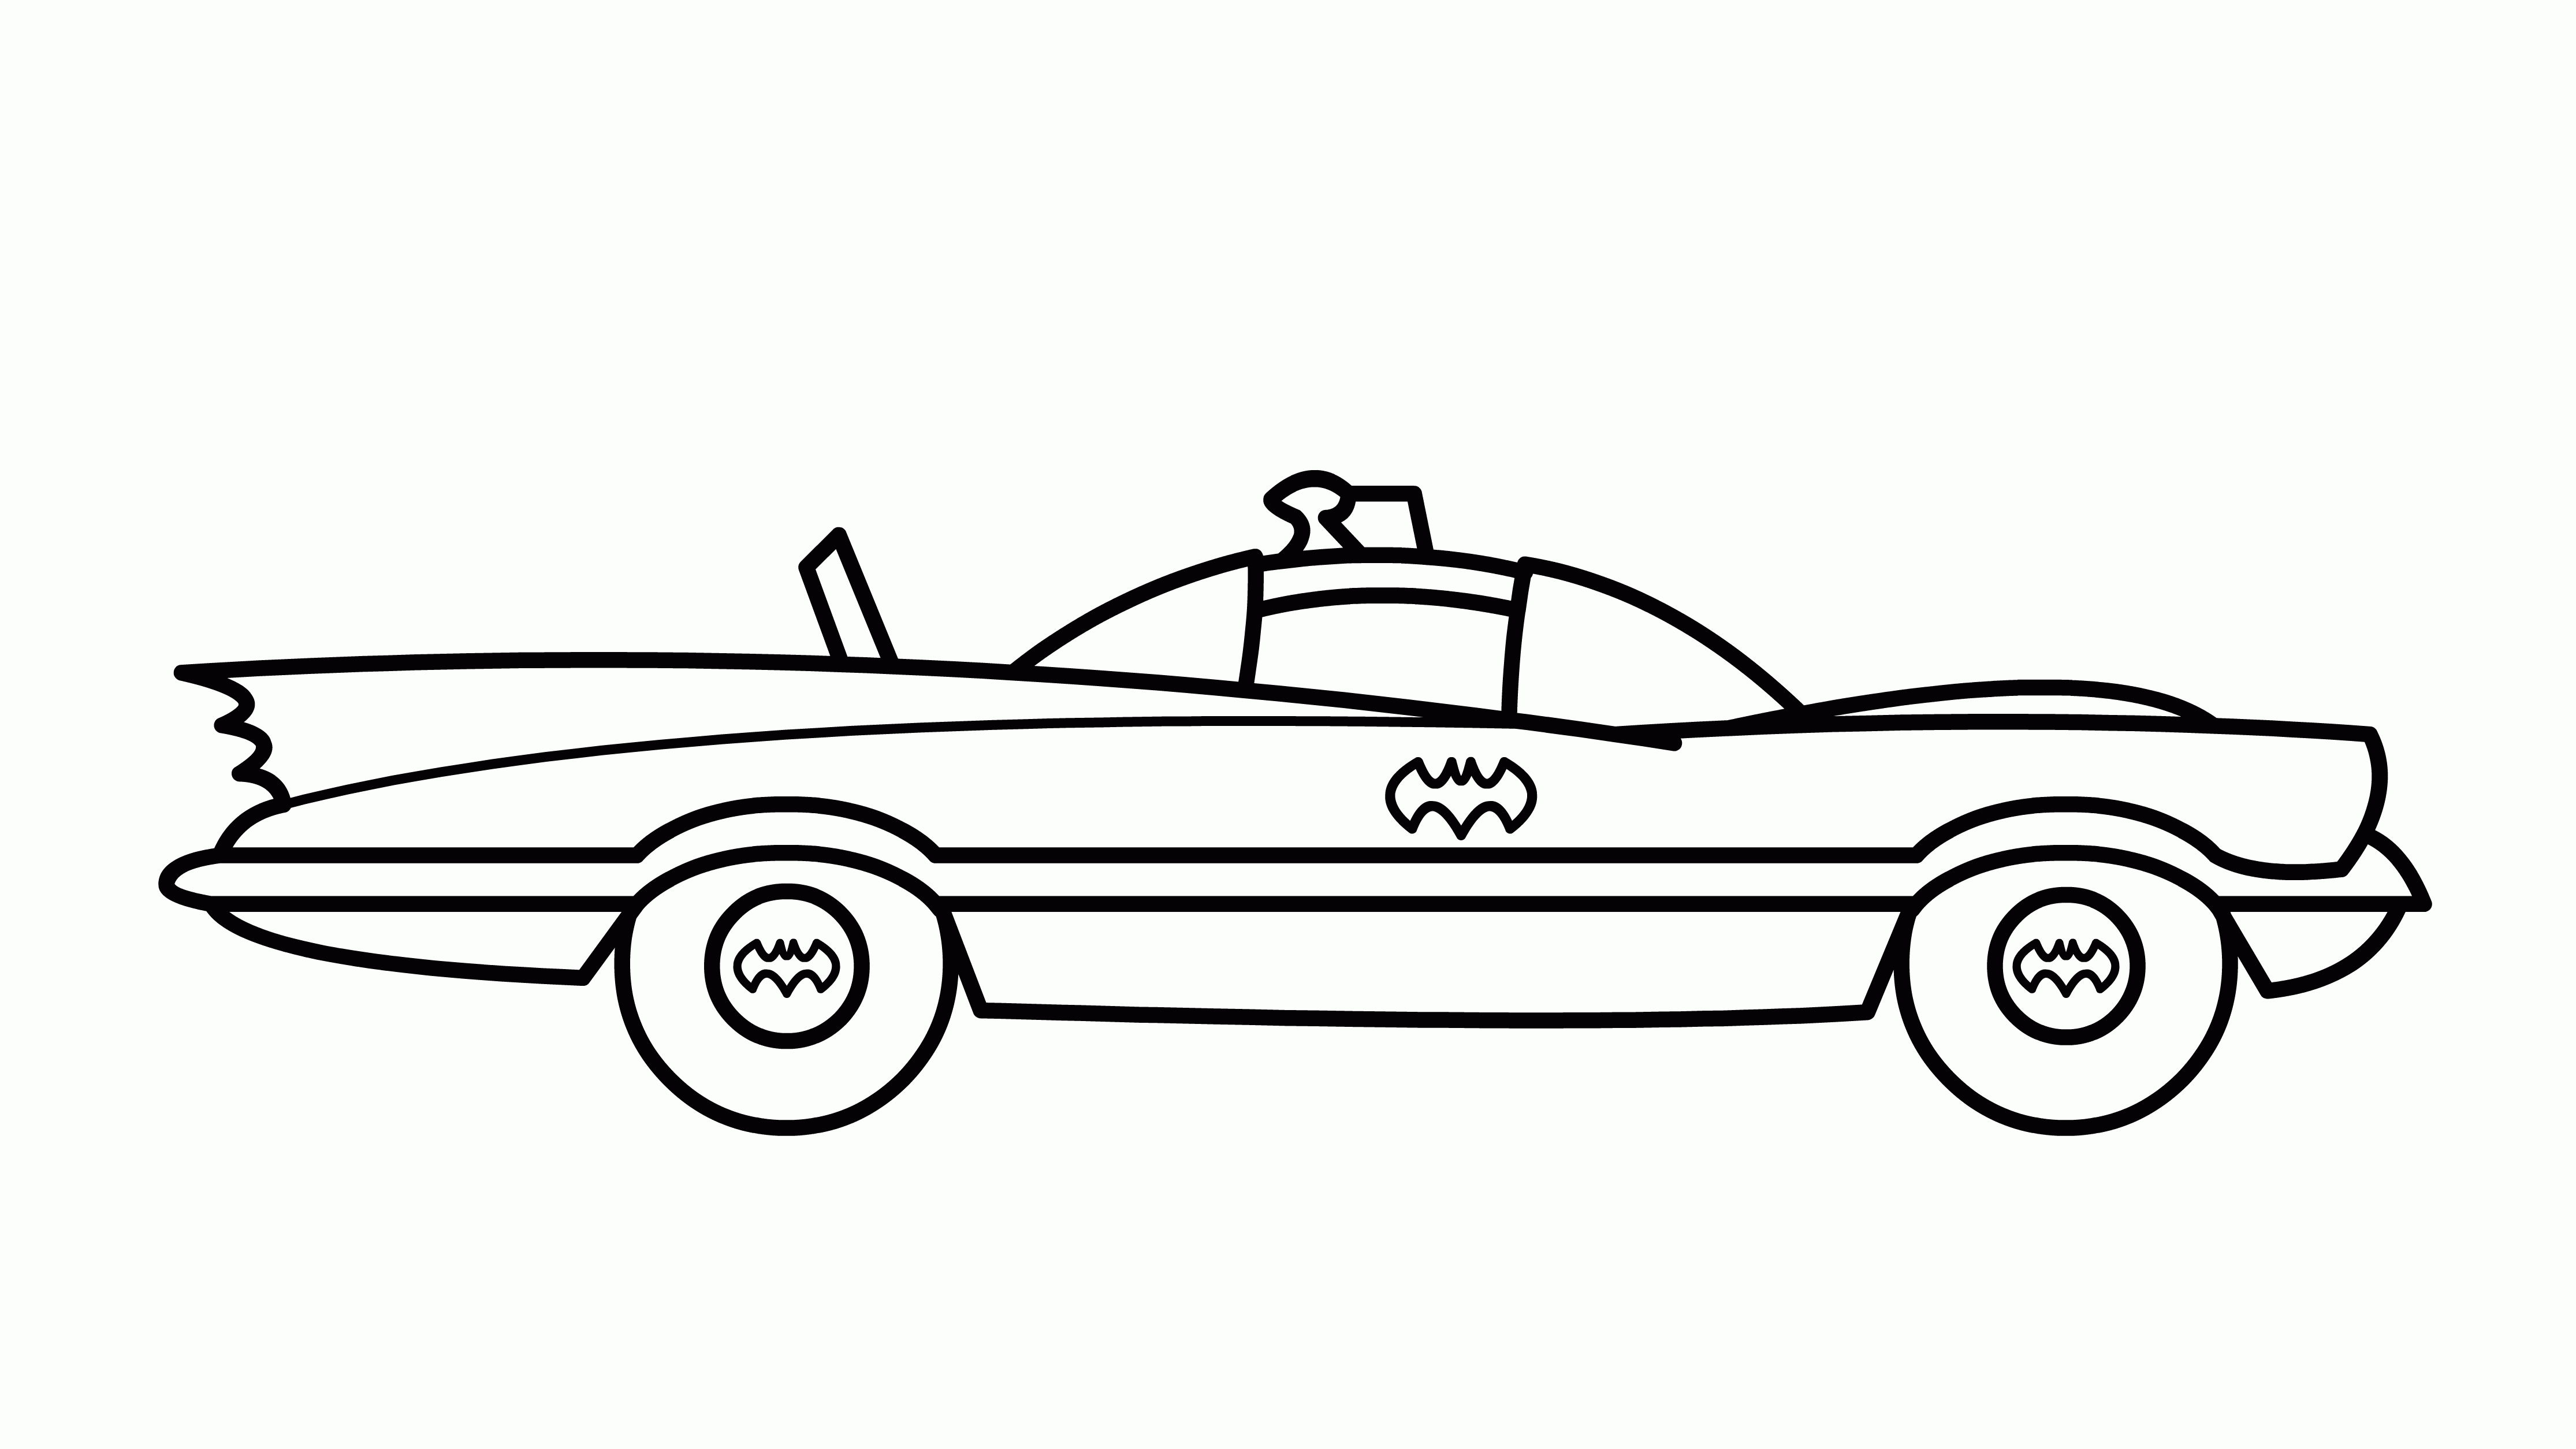 Batmobile Coloring Page - Coloring Home